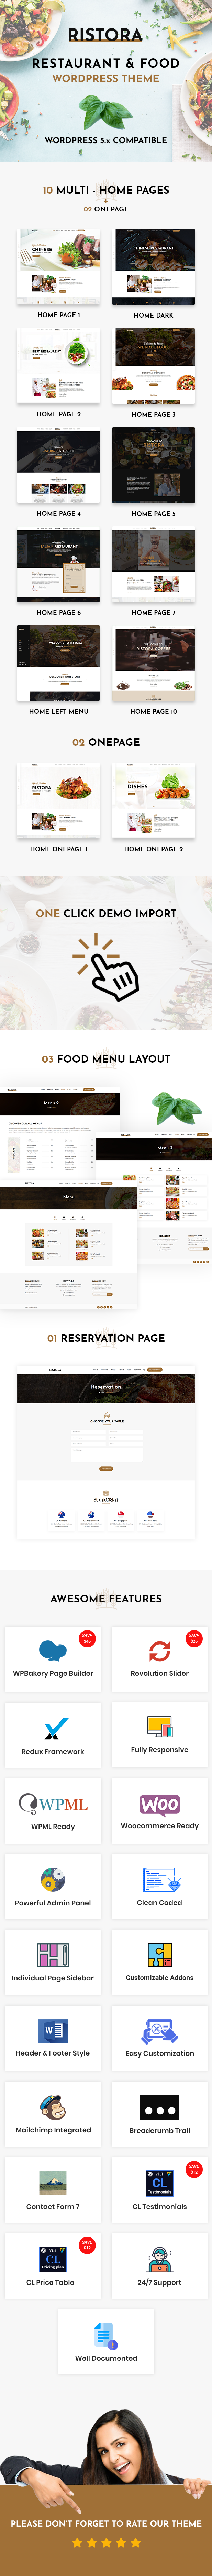 So big white template with a simple minimalistic design for a restaurant business.